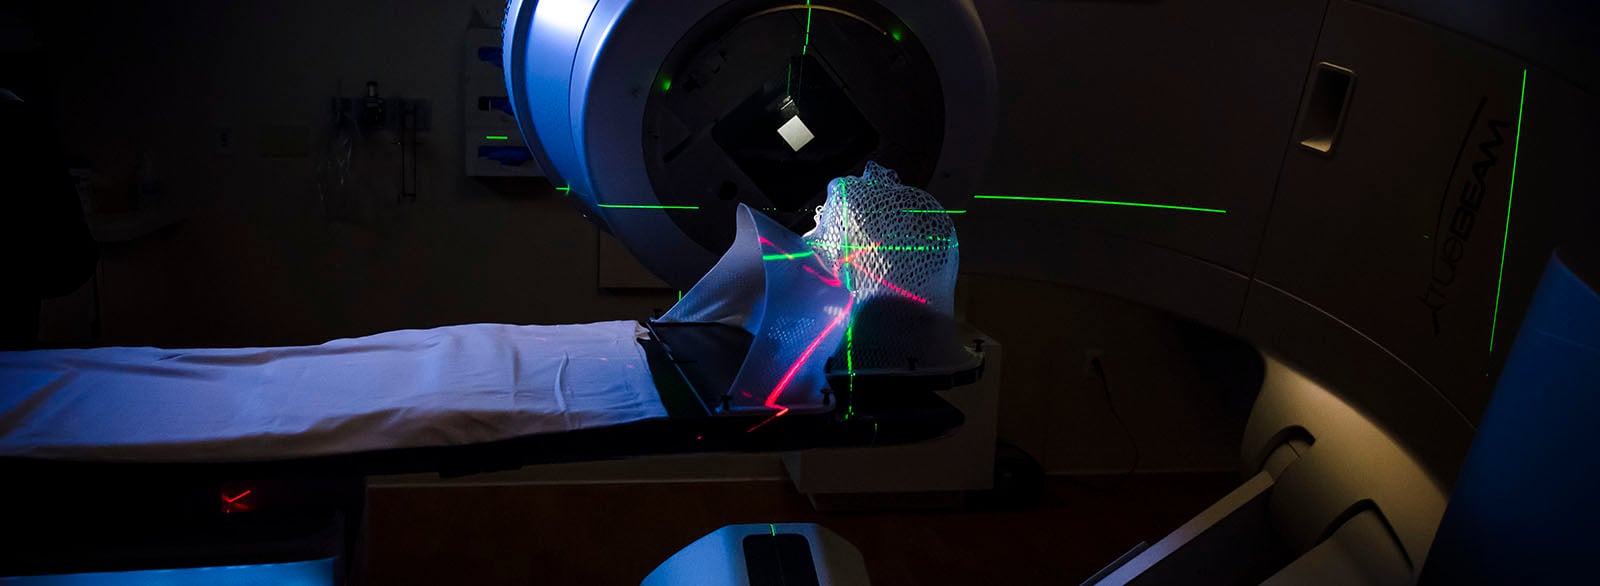 Linear accelerator used in cancer radiation therapy